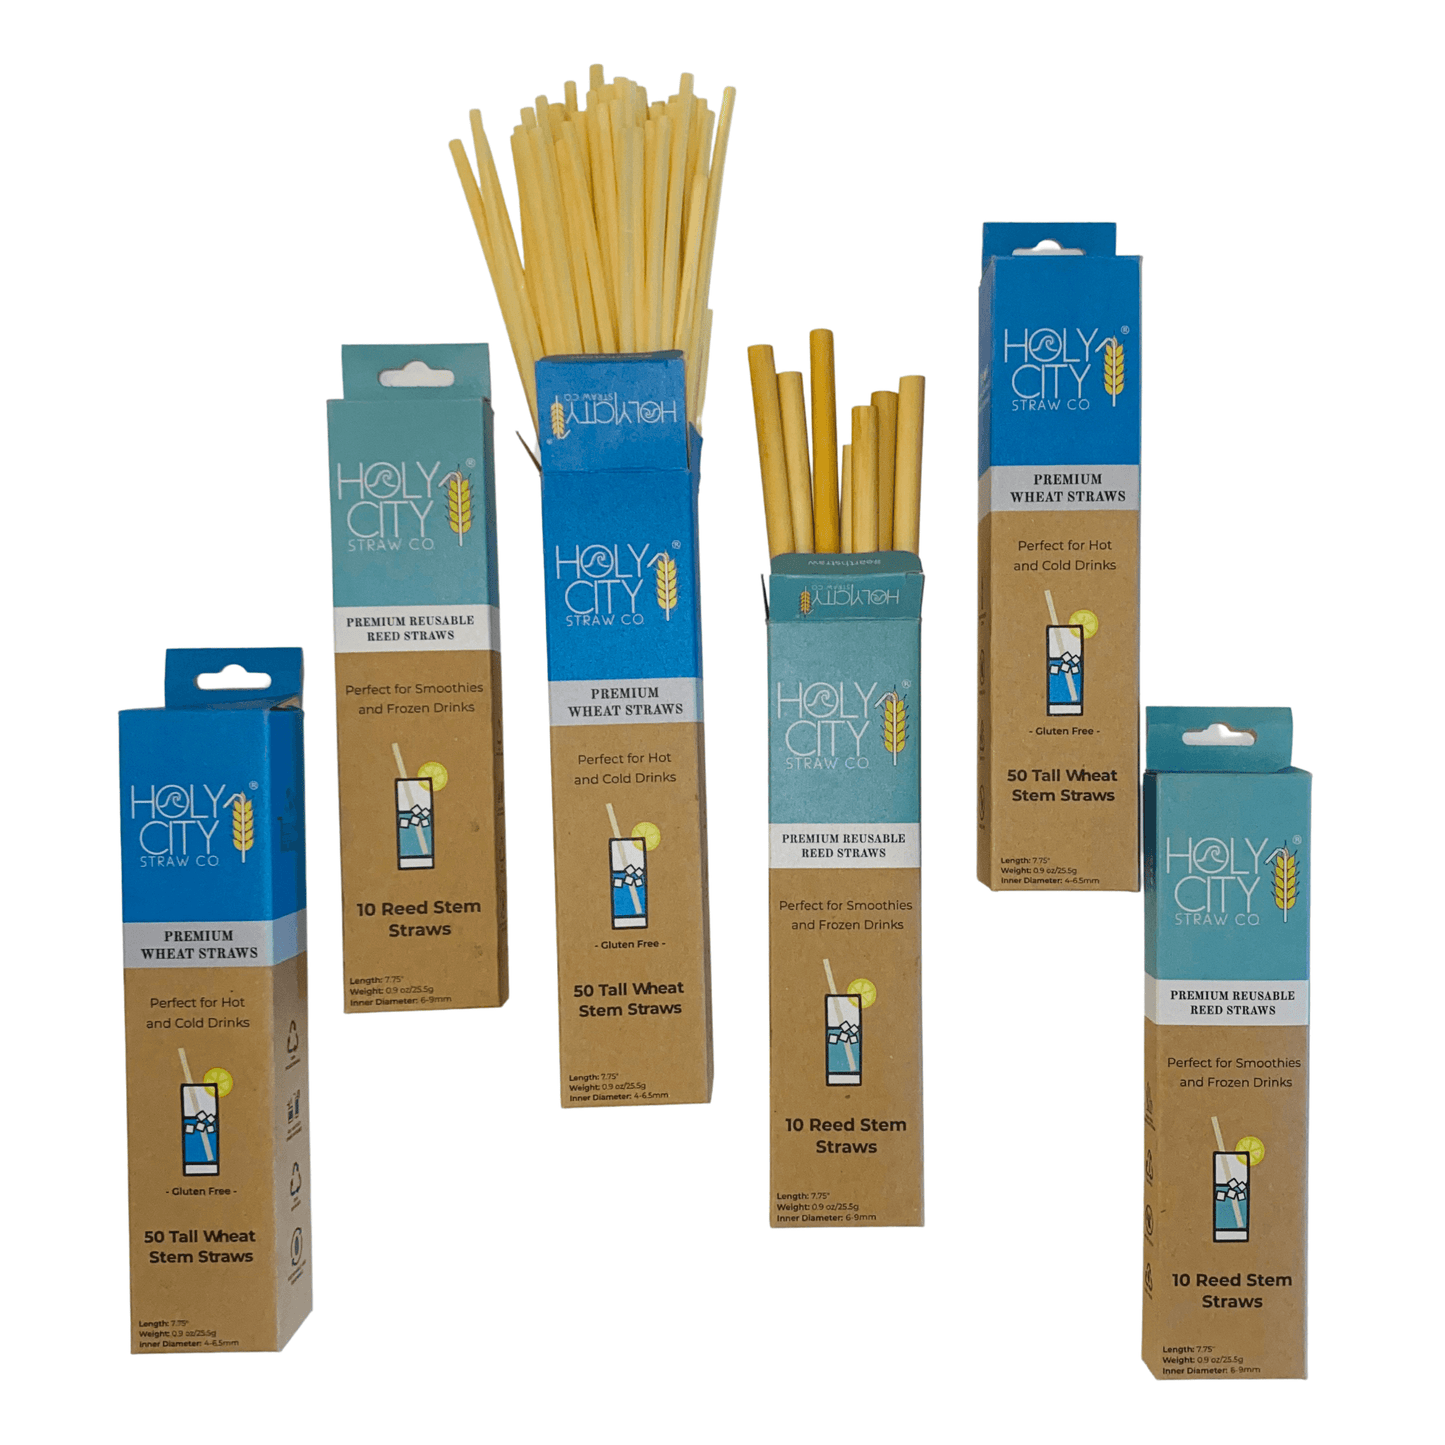 Wheat and Reed Straw Bundle - 6 Pack by Holy City Straw Company